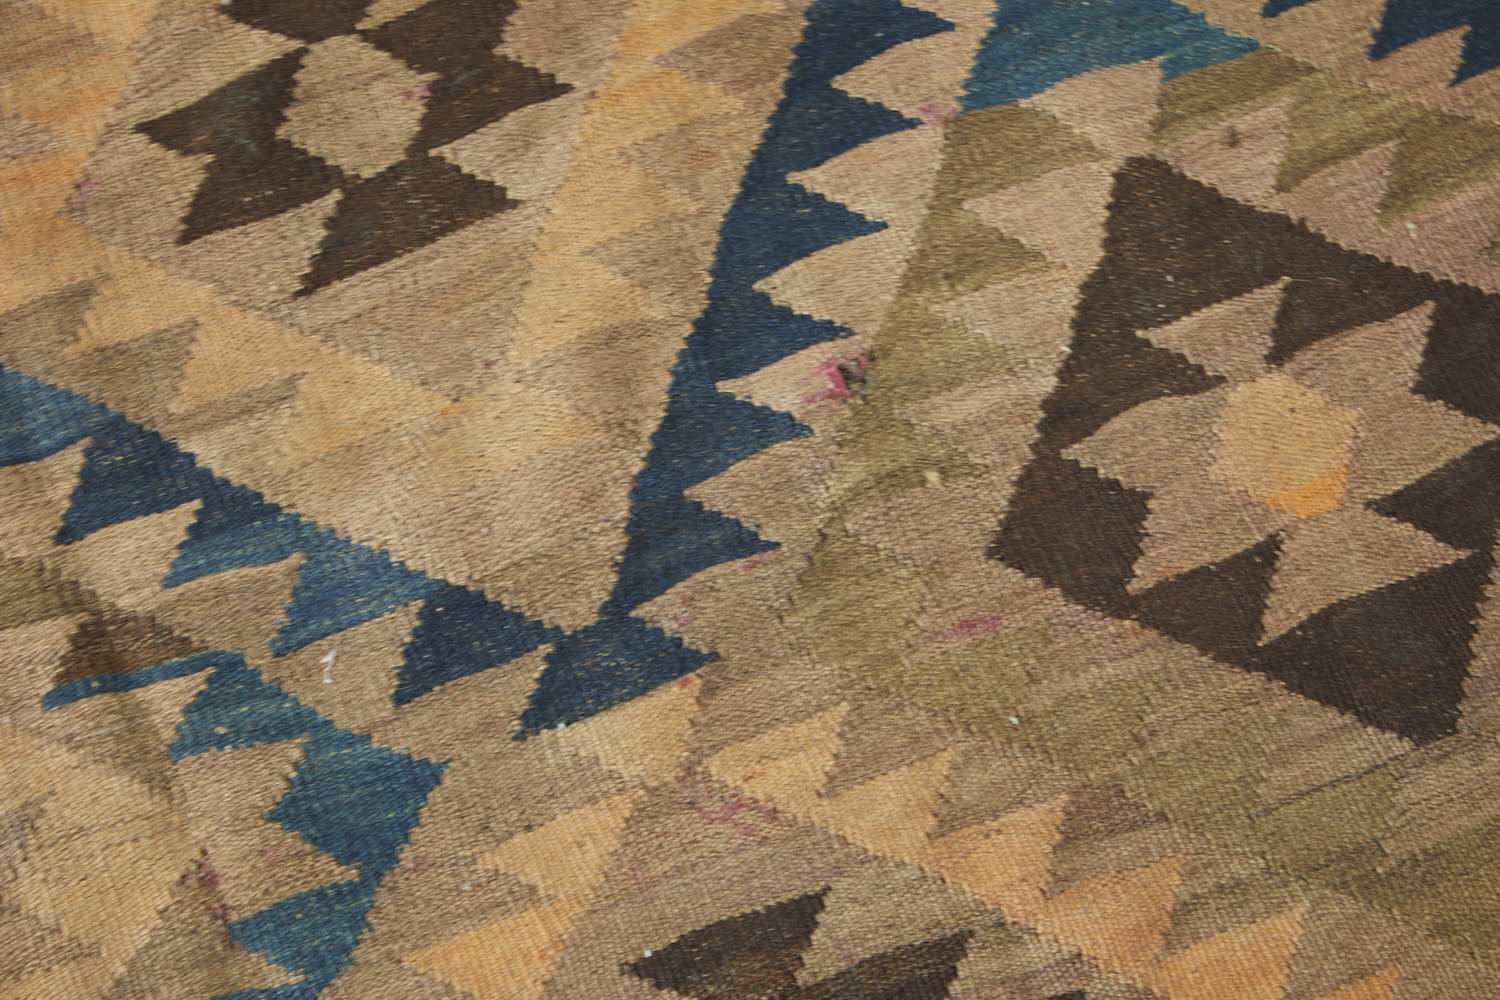 Maimana Turkish Kilim area rug with tan, beige and brown earthy tones, along with blue, cream and peach geometric patterns. Hand woven large area rug - Available from King Kennedy Rugs Los Angeles